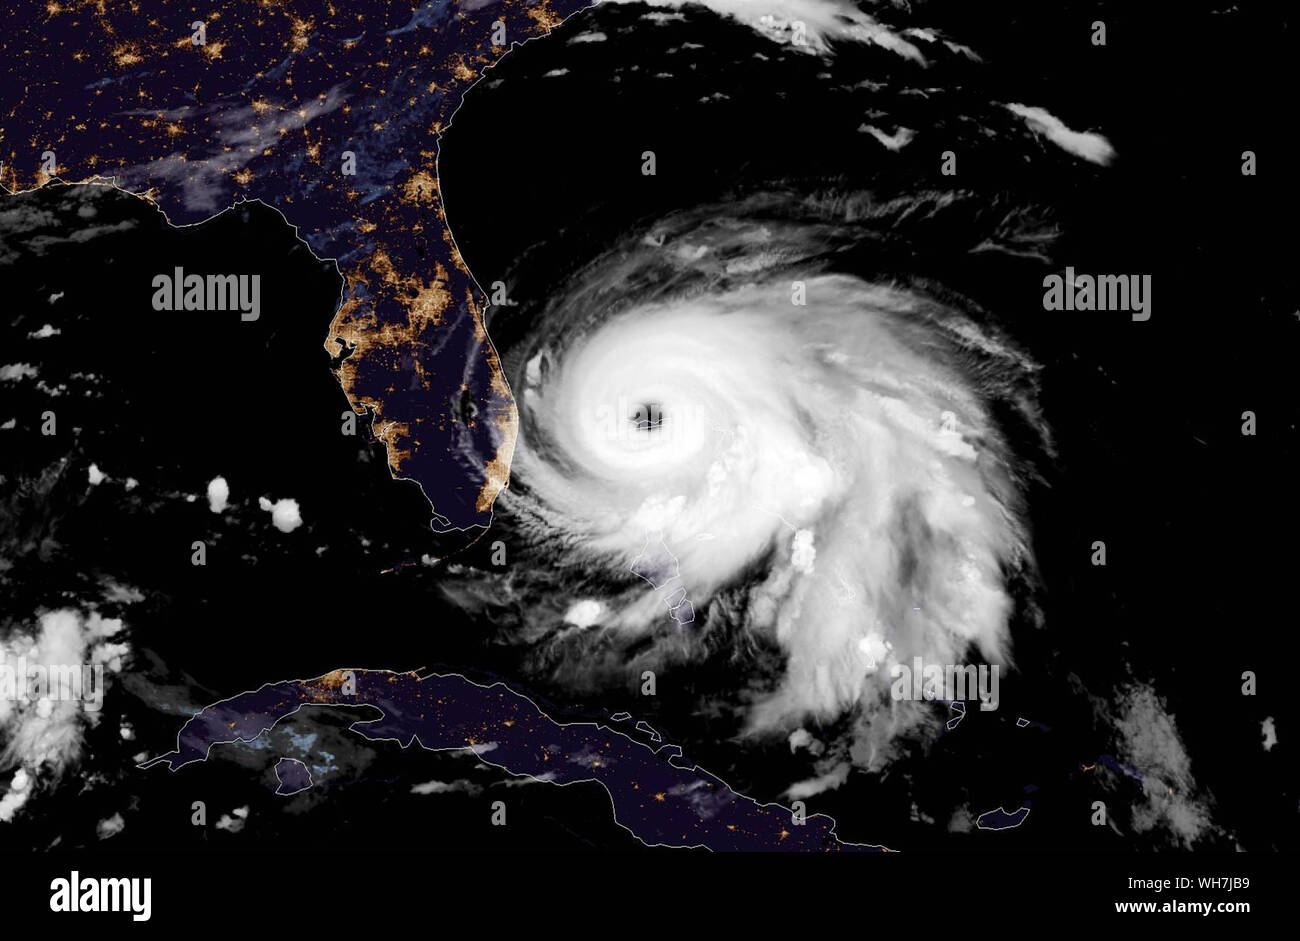 Hurricane Dorian is captured by NOAA's GOES-East satellite at 06:20 AM EST on September 2, 2019, approximately 115 miles east of West Palm Beach, Florida. Maximum sustained winds are near 165 mph (270 km/h), making Dorian is a category 5 hurricane on the Saffir-Simpson Hurricane Wind Scale. NASA/UPI Credit: UPI/Alamy Live News Stock Photo